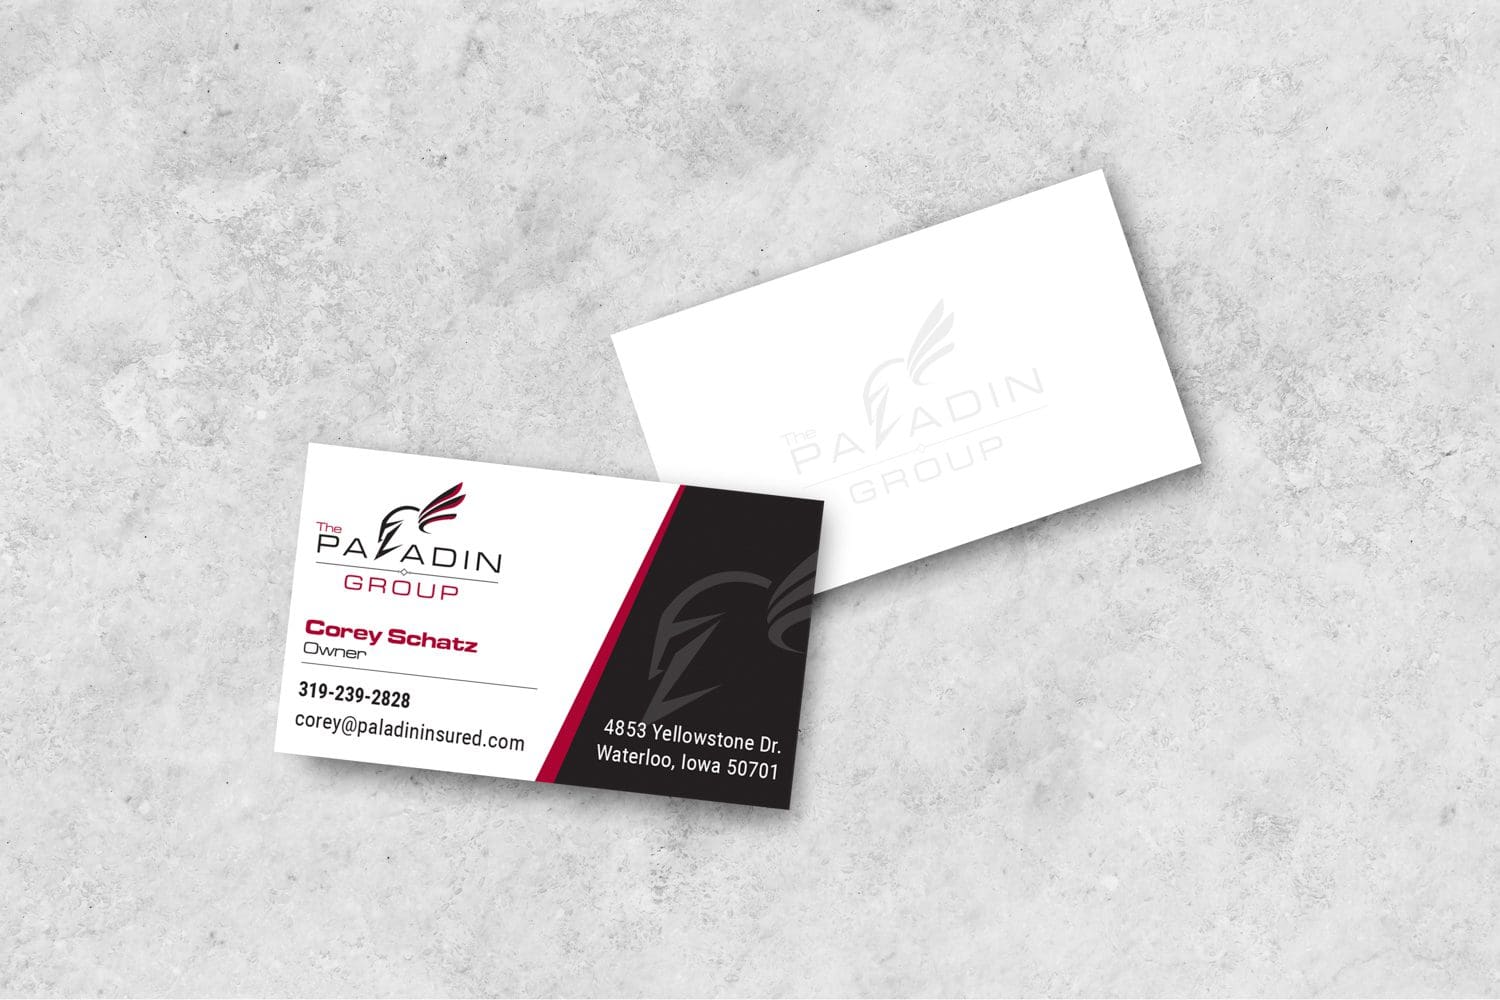 The Paladin Group business cards